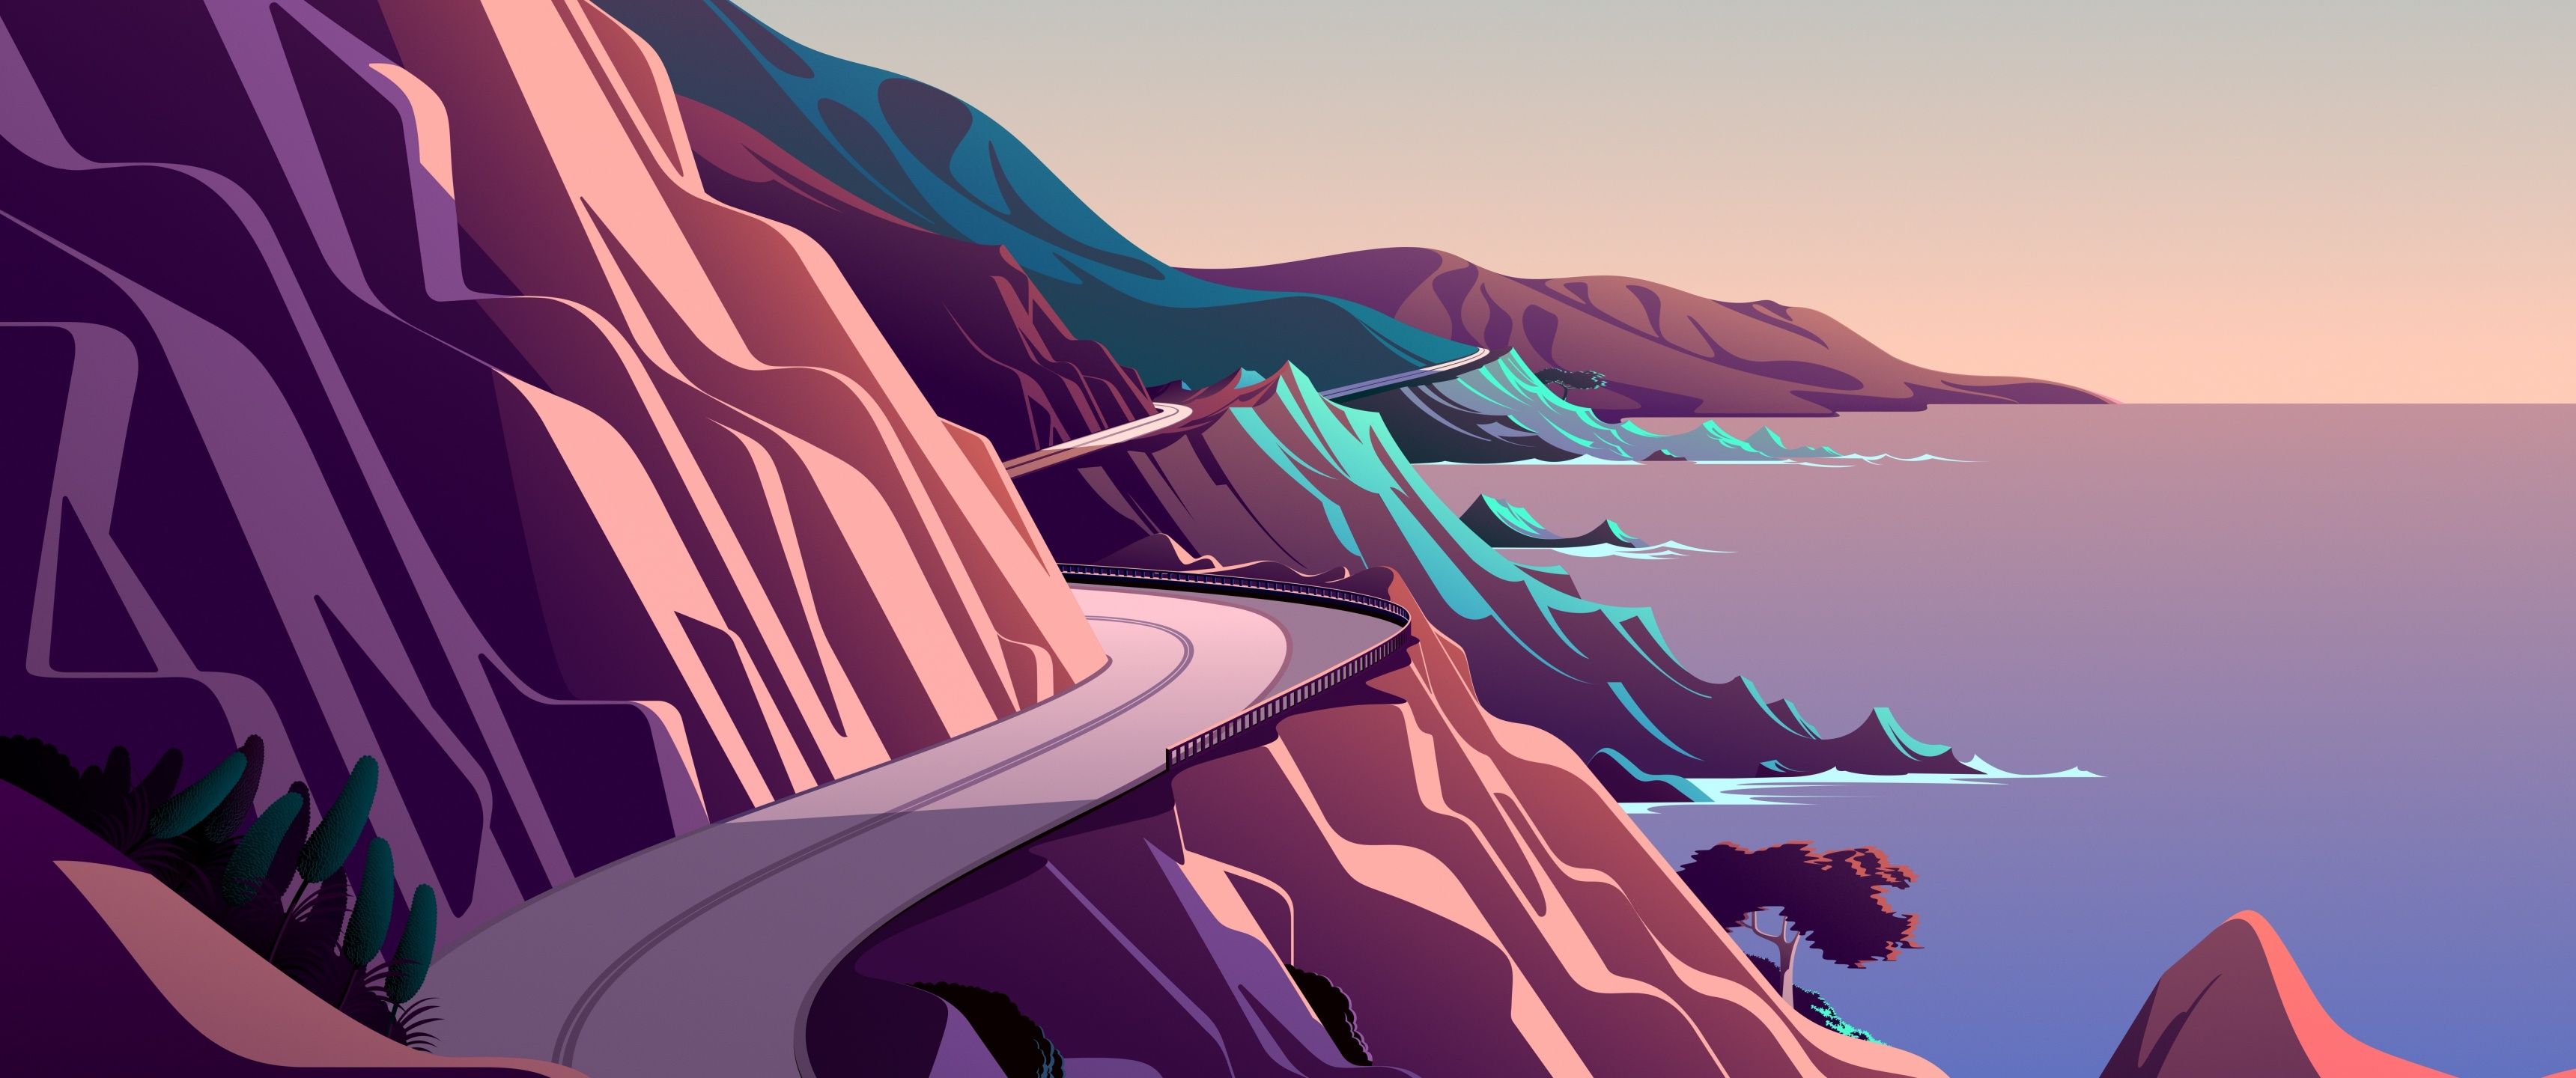 A road is going down the side of some cliffs - 3440x1440